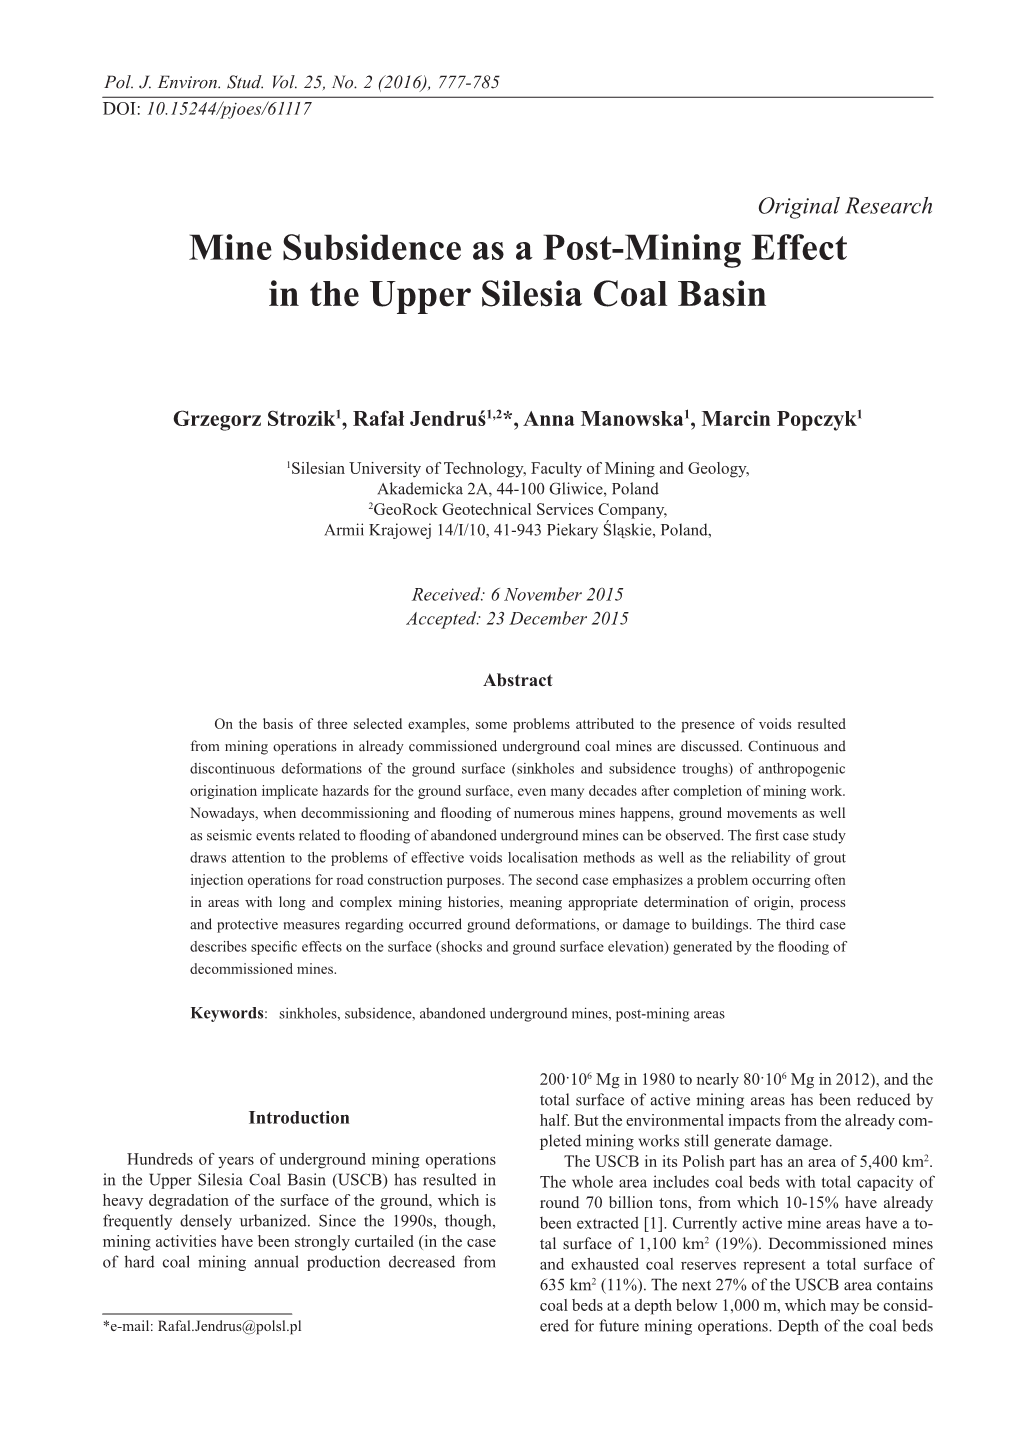 Mine Subsidence As a Post-Mining Effect in the Upper Silesia Coal Basin